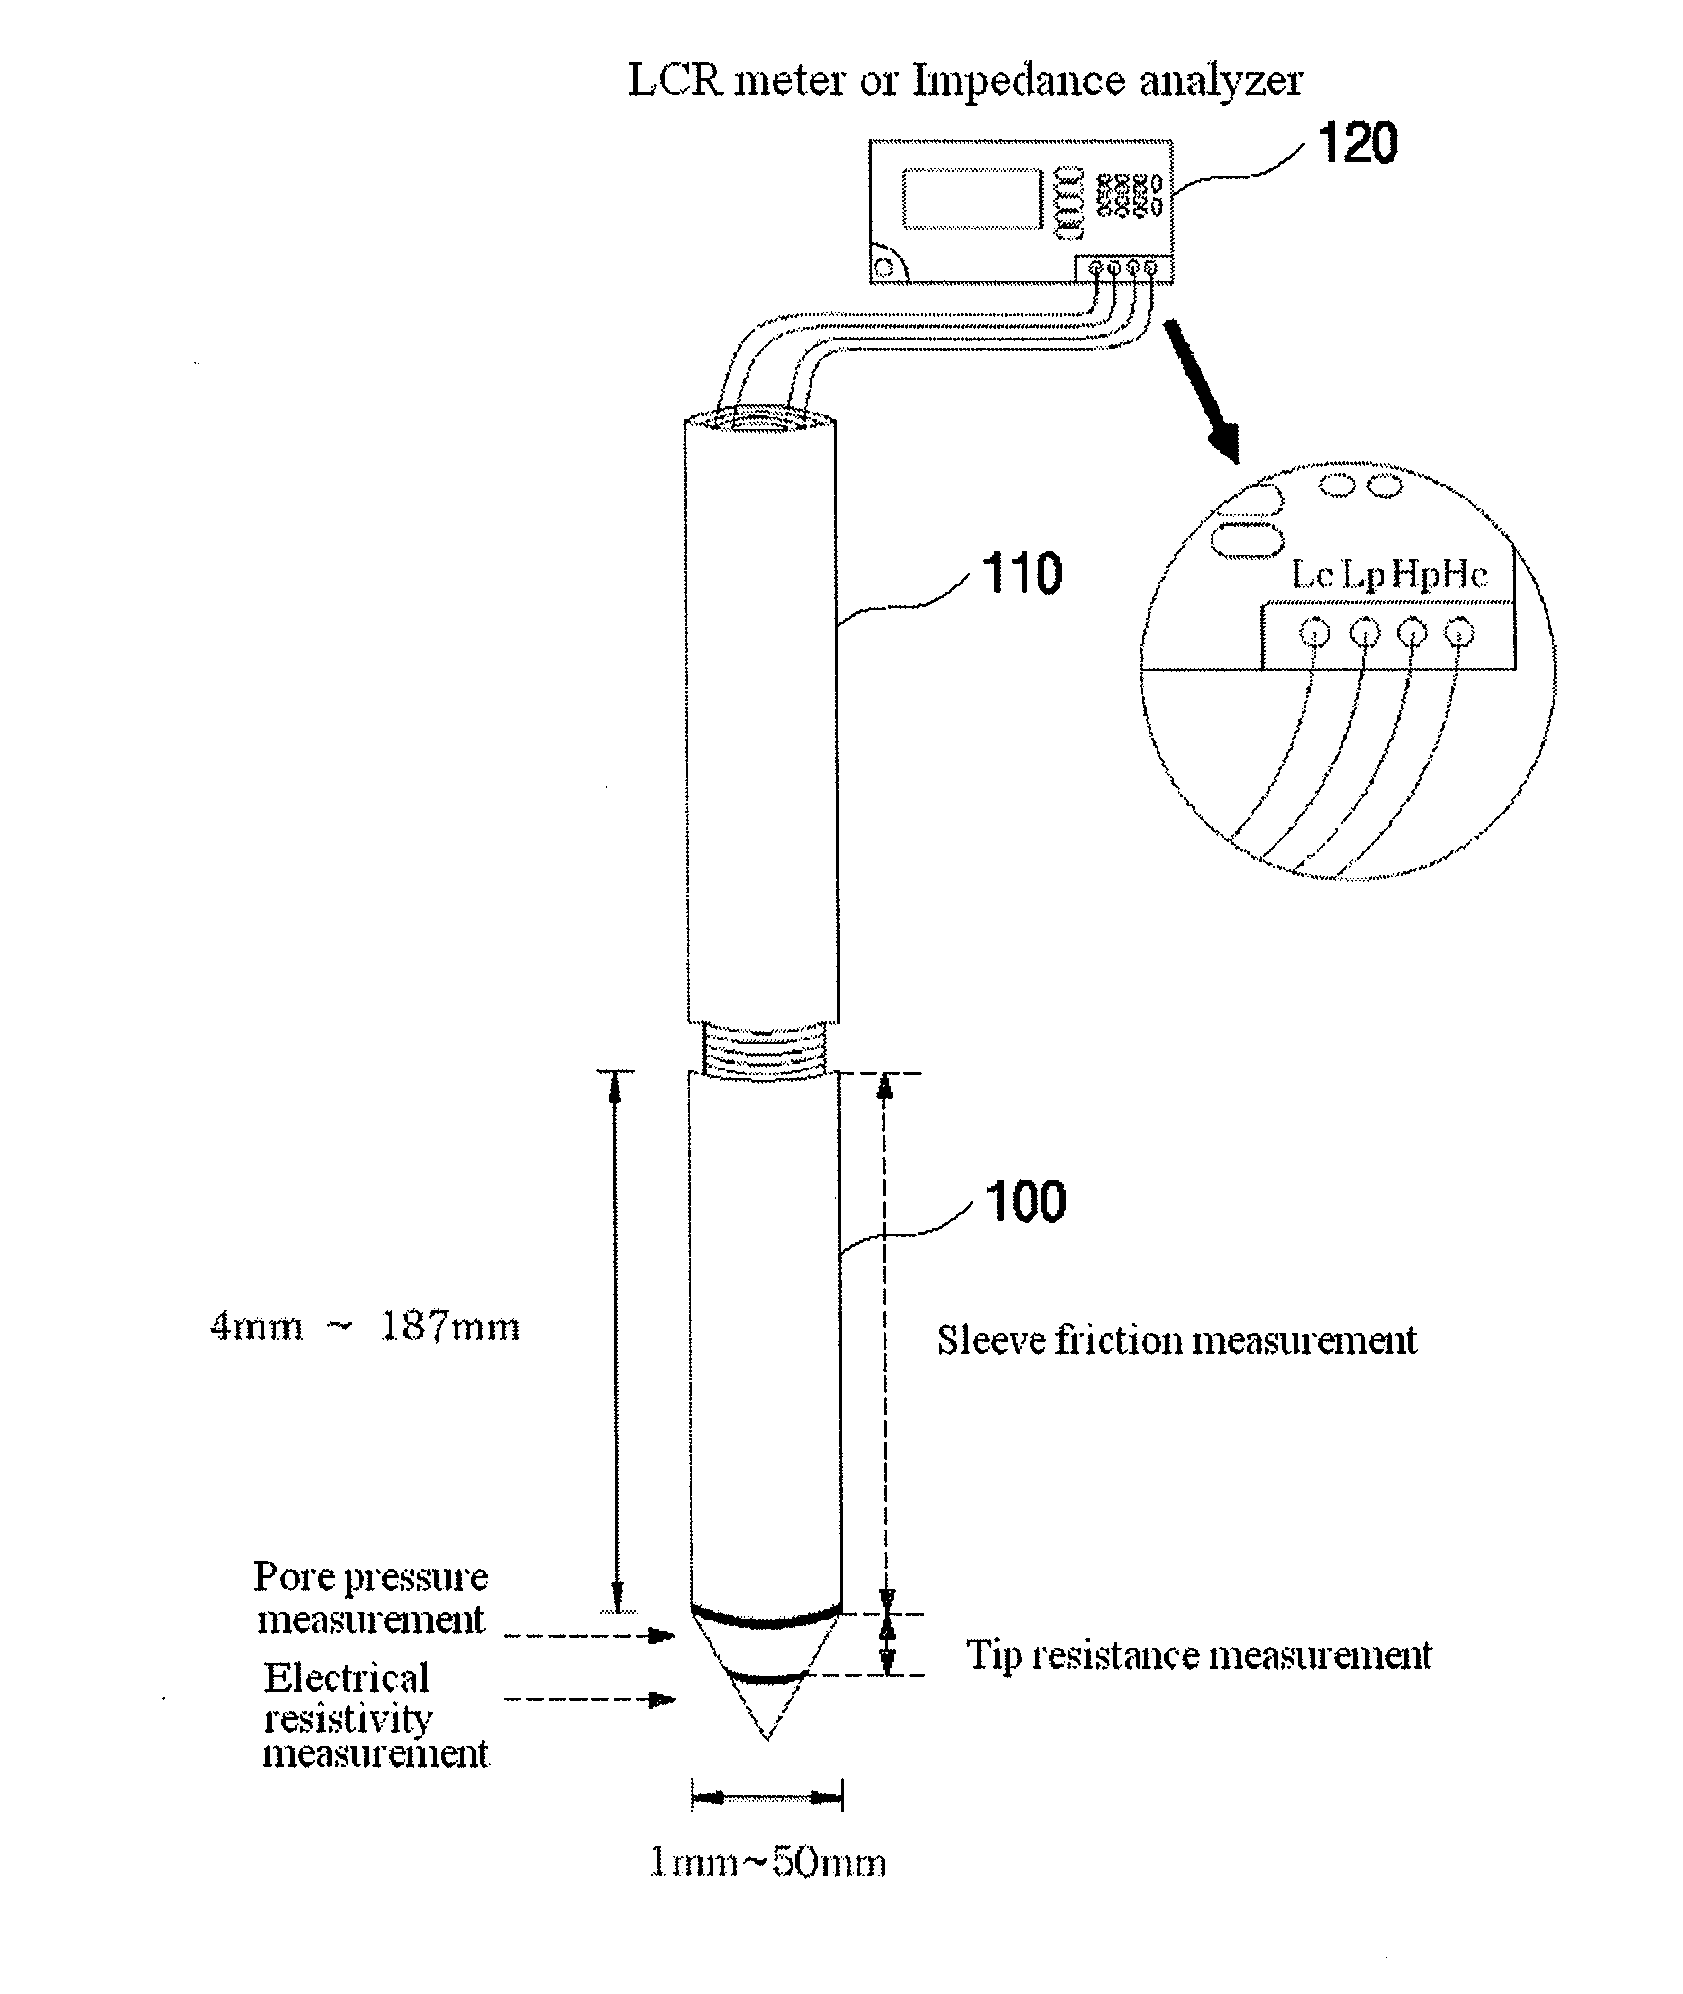 Cone penetrometers for measuring impedance of ground